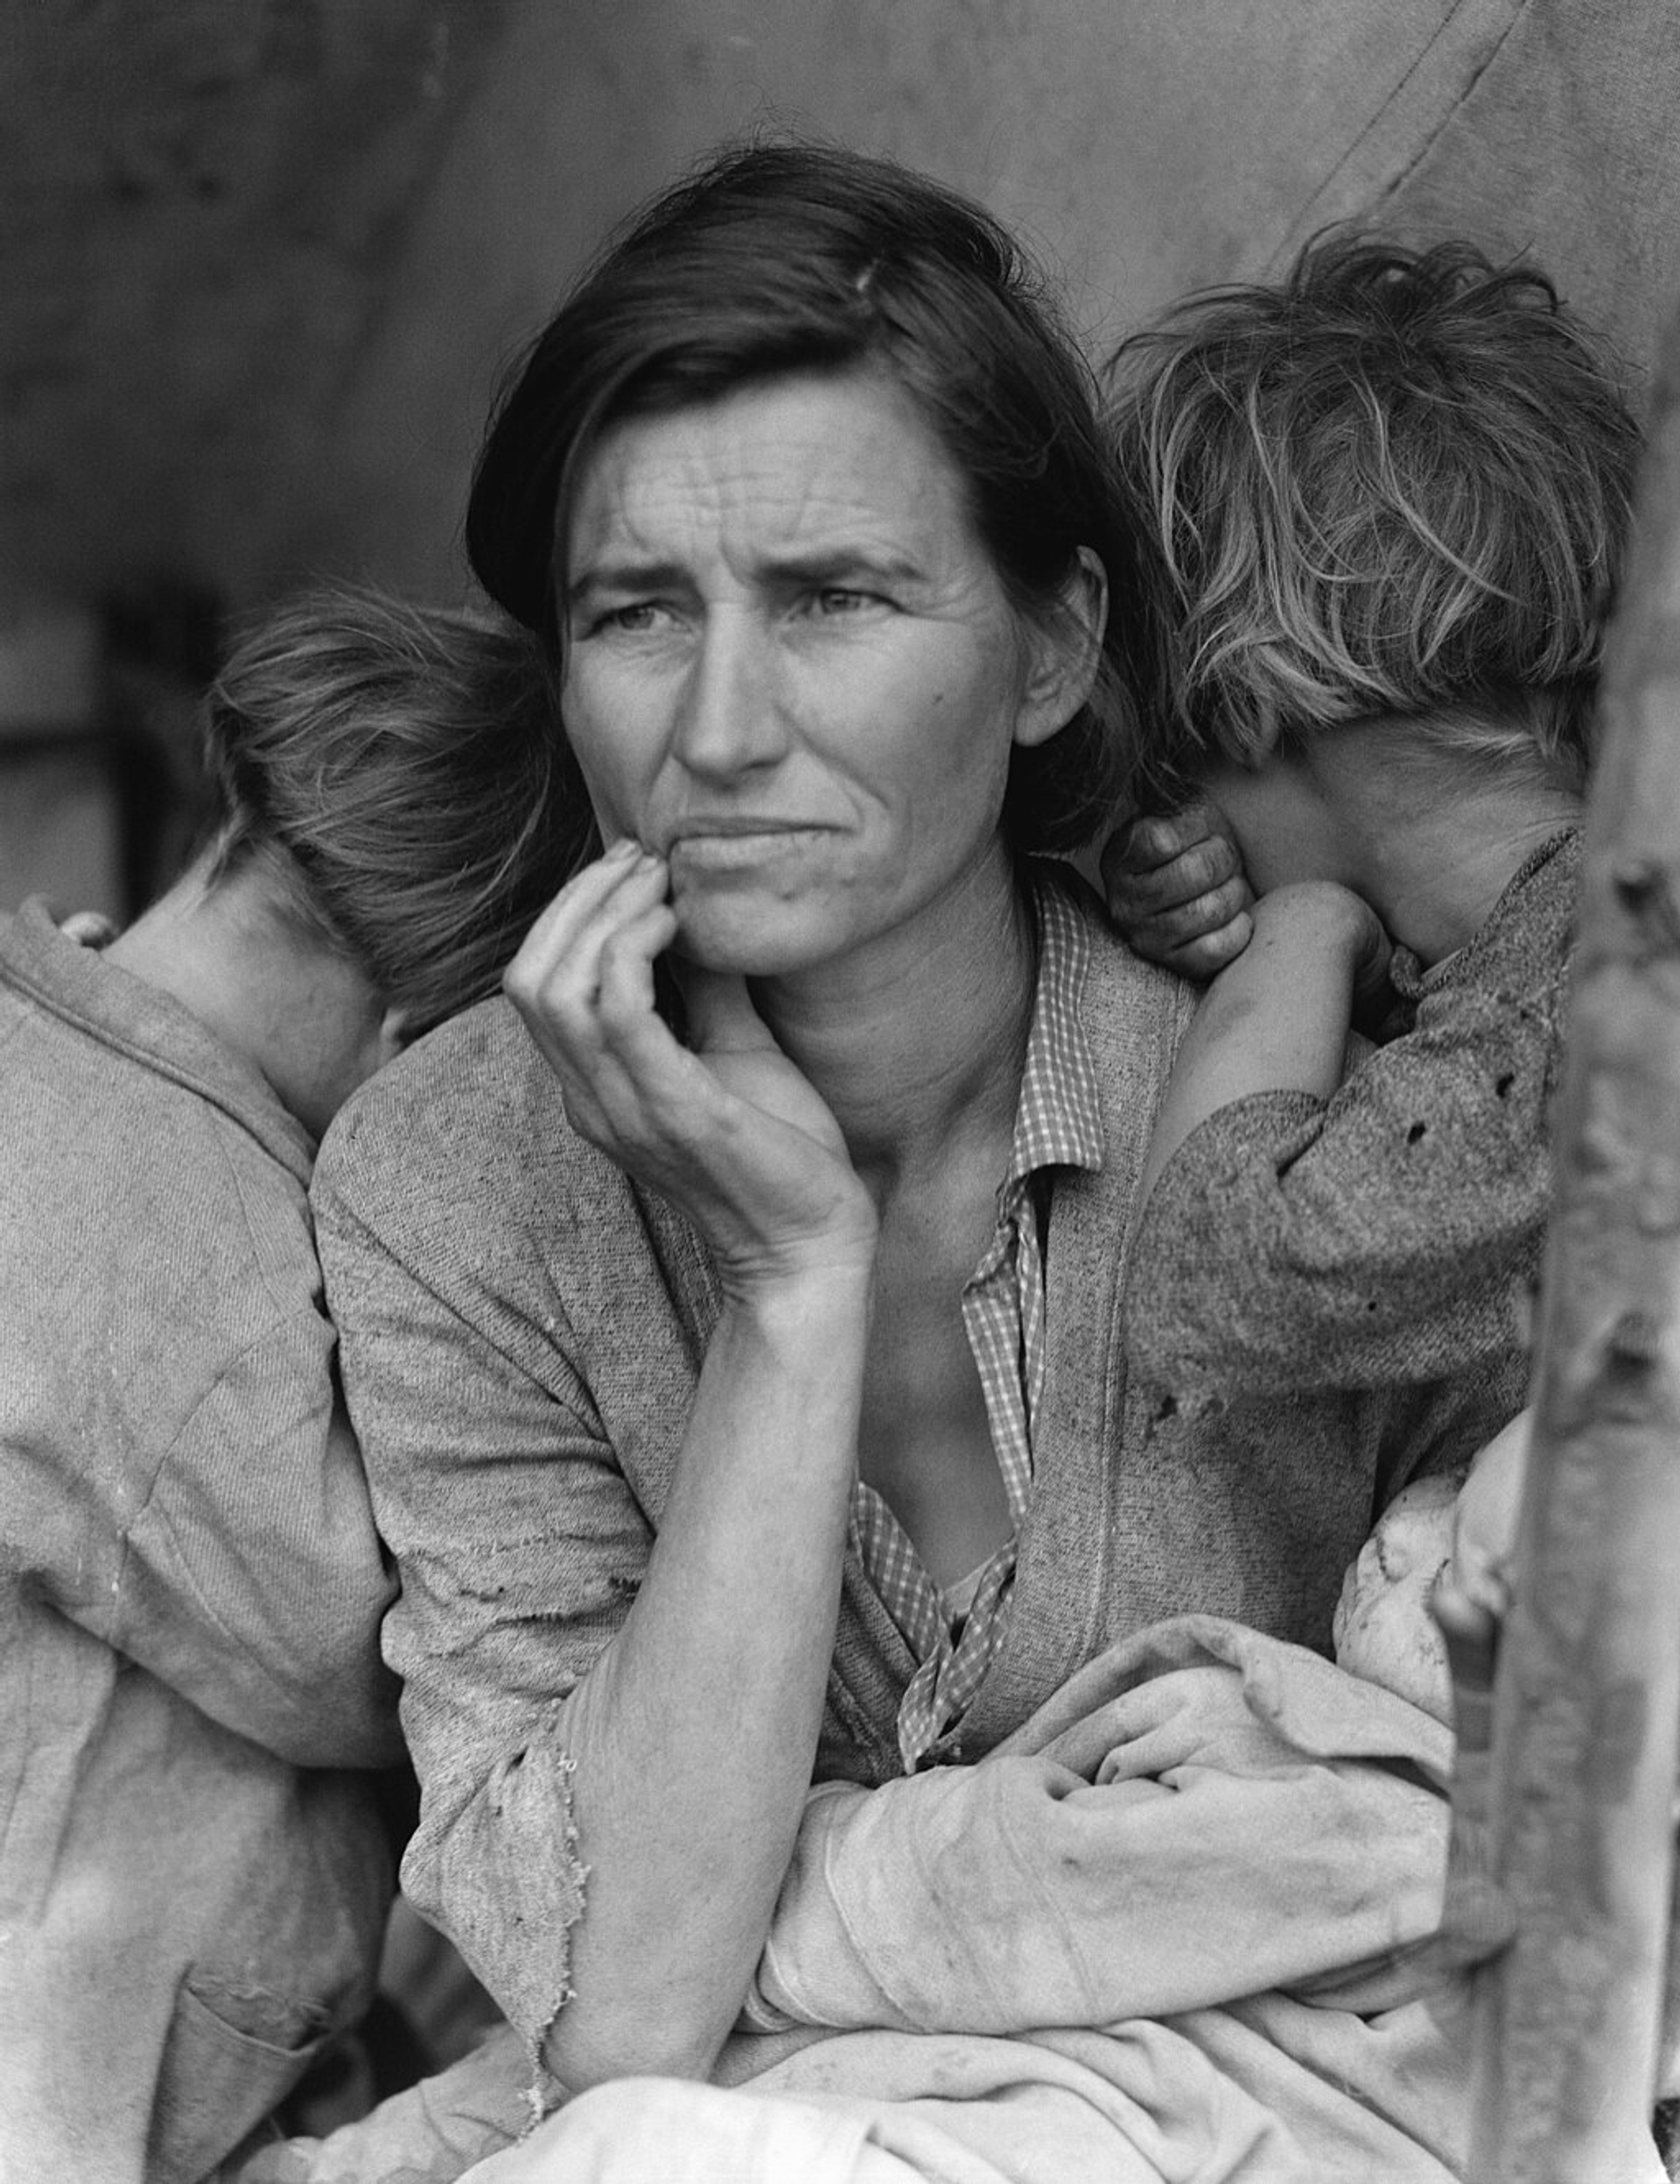 A black and white photograph of a woman with her two children. She has a despondent and worried look on her face.